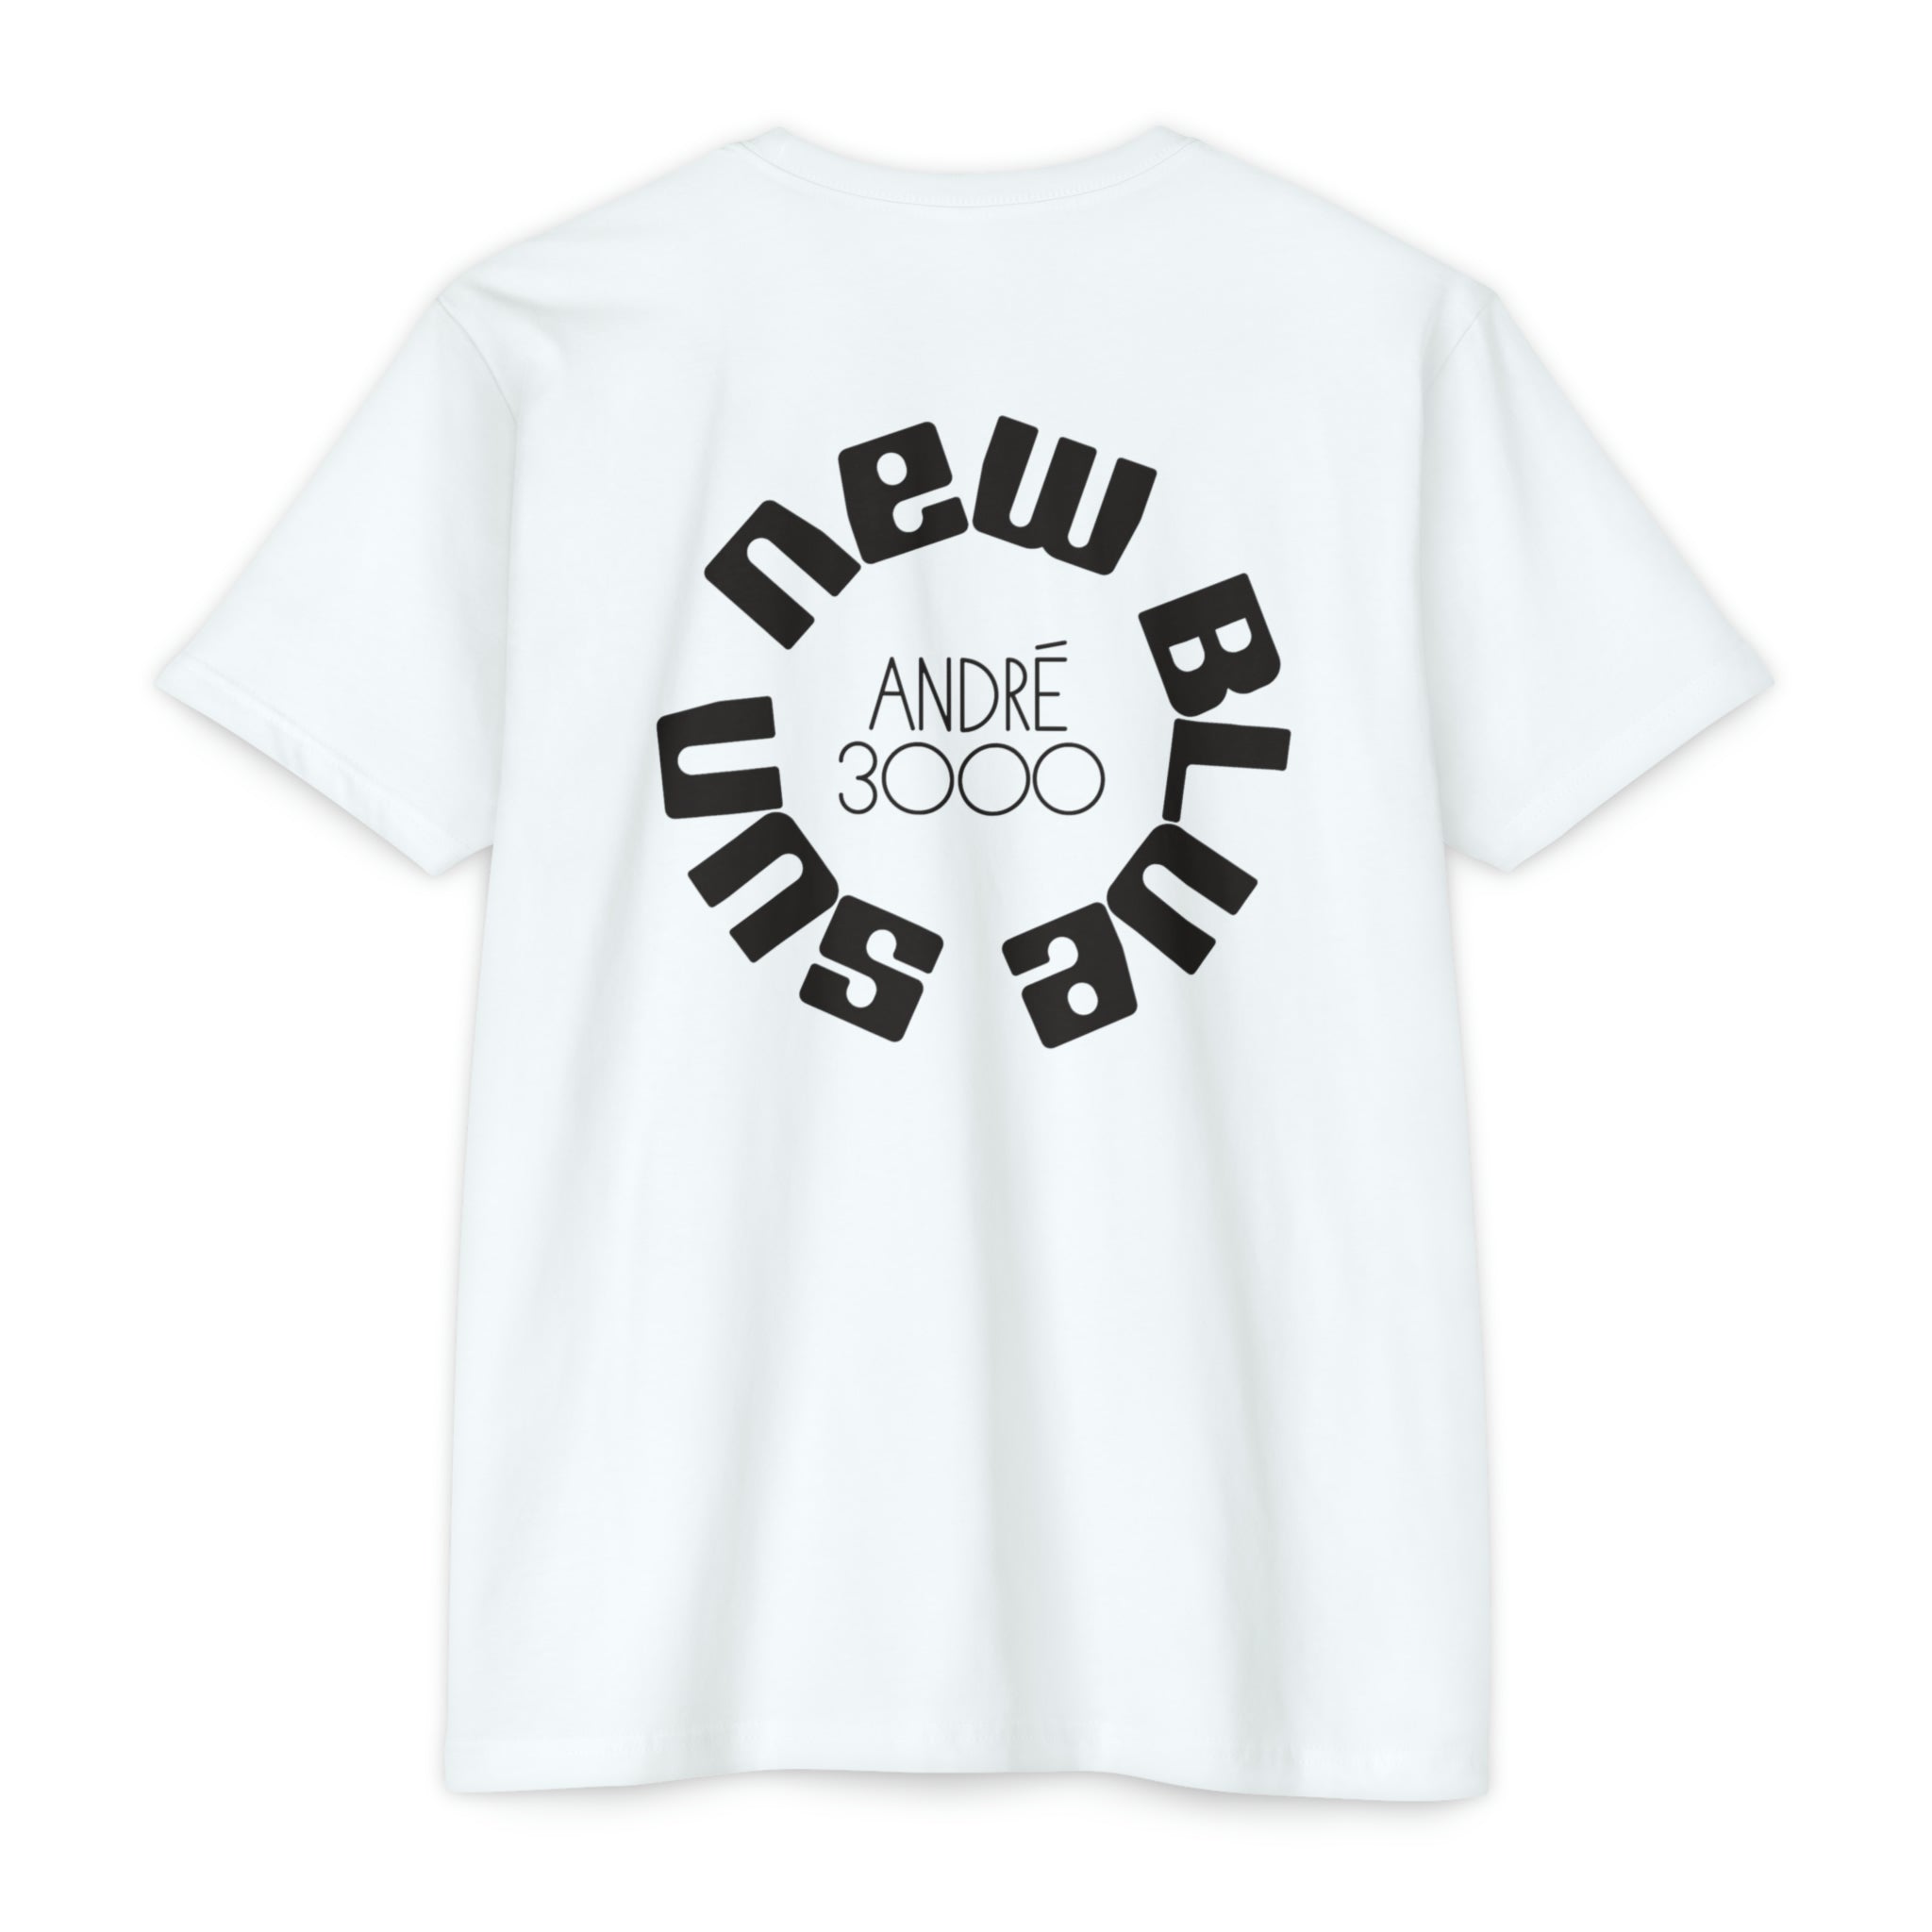 Andre 3000 - New Blue Moon T-shirt